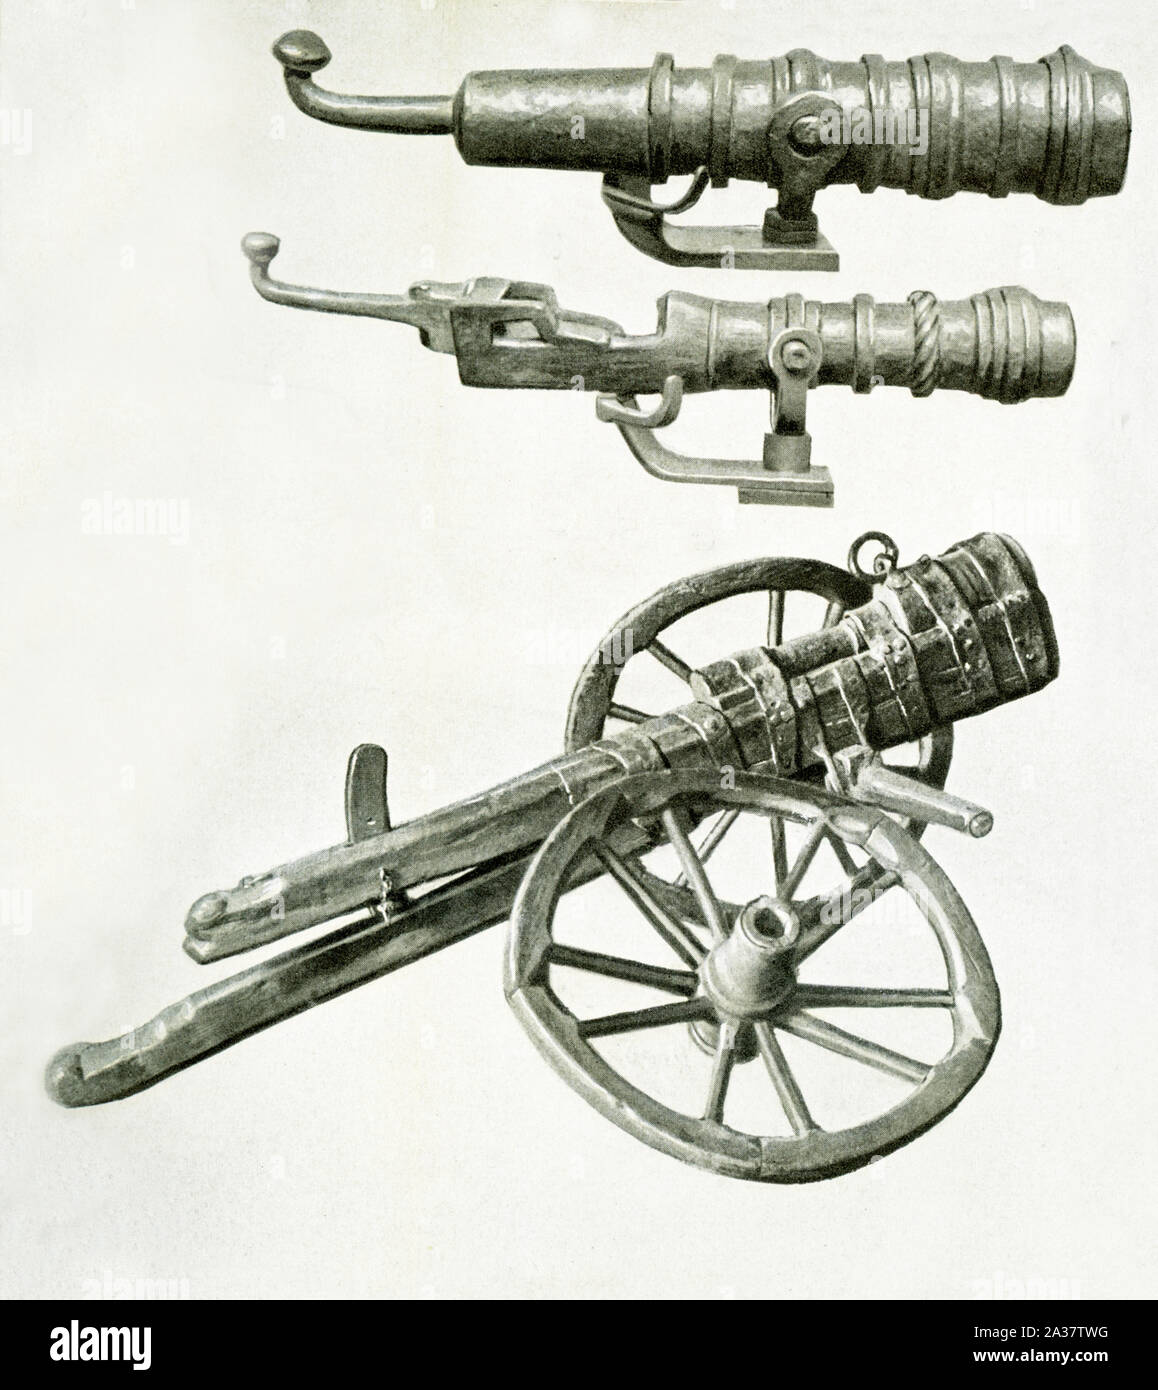 Pictured here are three medieval military weapons, all early cannon. The gun at top measures about 43 inches in length and dates to 1450-1500. The middle also measures abiut 43 inches in length and dates to 1480 to 1500 and could be used on a ship. The bottom cannon shot stones. It dates to 1450-1476. It measures about 32 inches in length. Stock Photo